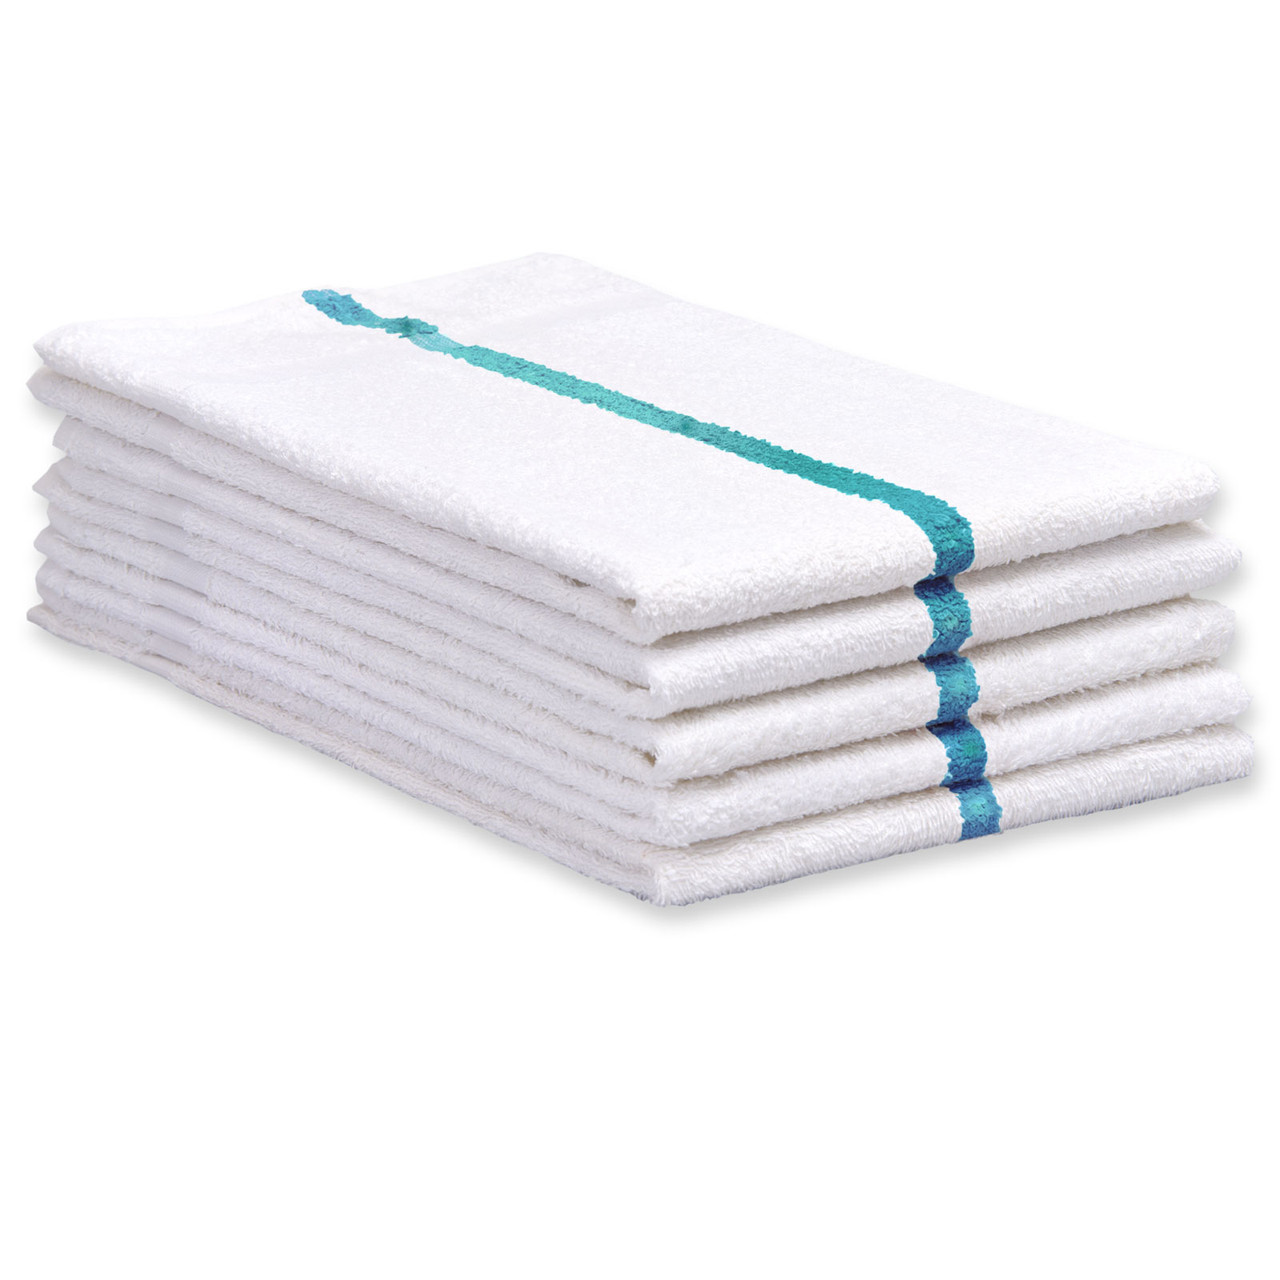 DecorRack Large Kitchen Towels, 100% Cotton, 16 x 27 inches, White and  Green, 6 